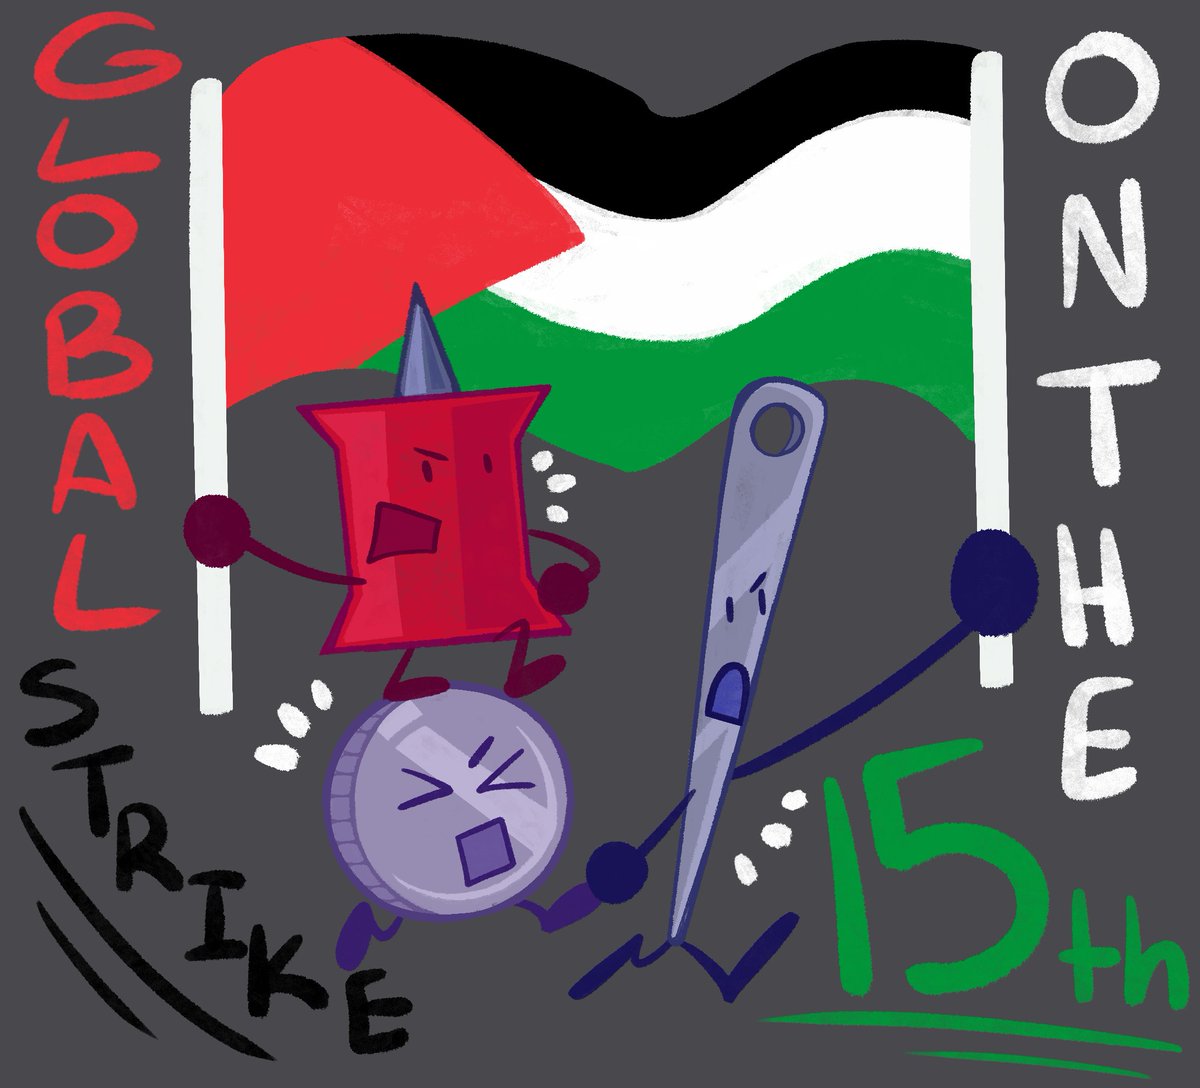 day  31 ;  Striking  for  Palestine  !  

Reminder that tomorrow (April 15th) there will be a global strike for one day! #FreePalestine #CeasefireNOW #FromTheRiverToTheSea #bfdi #tpot (  more info in thread  ) -🌙